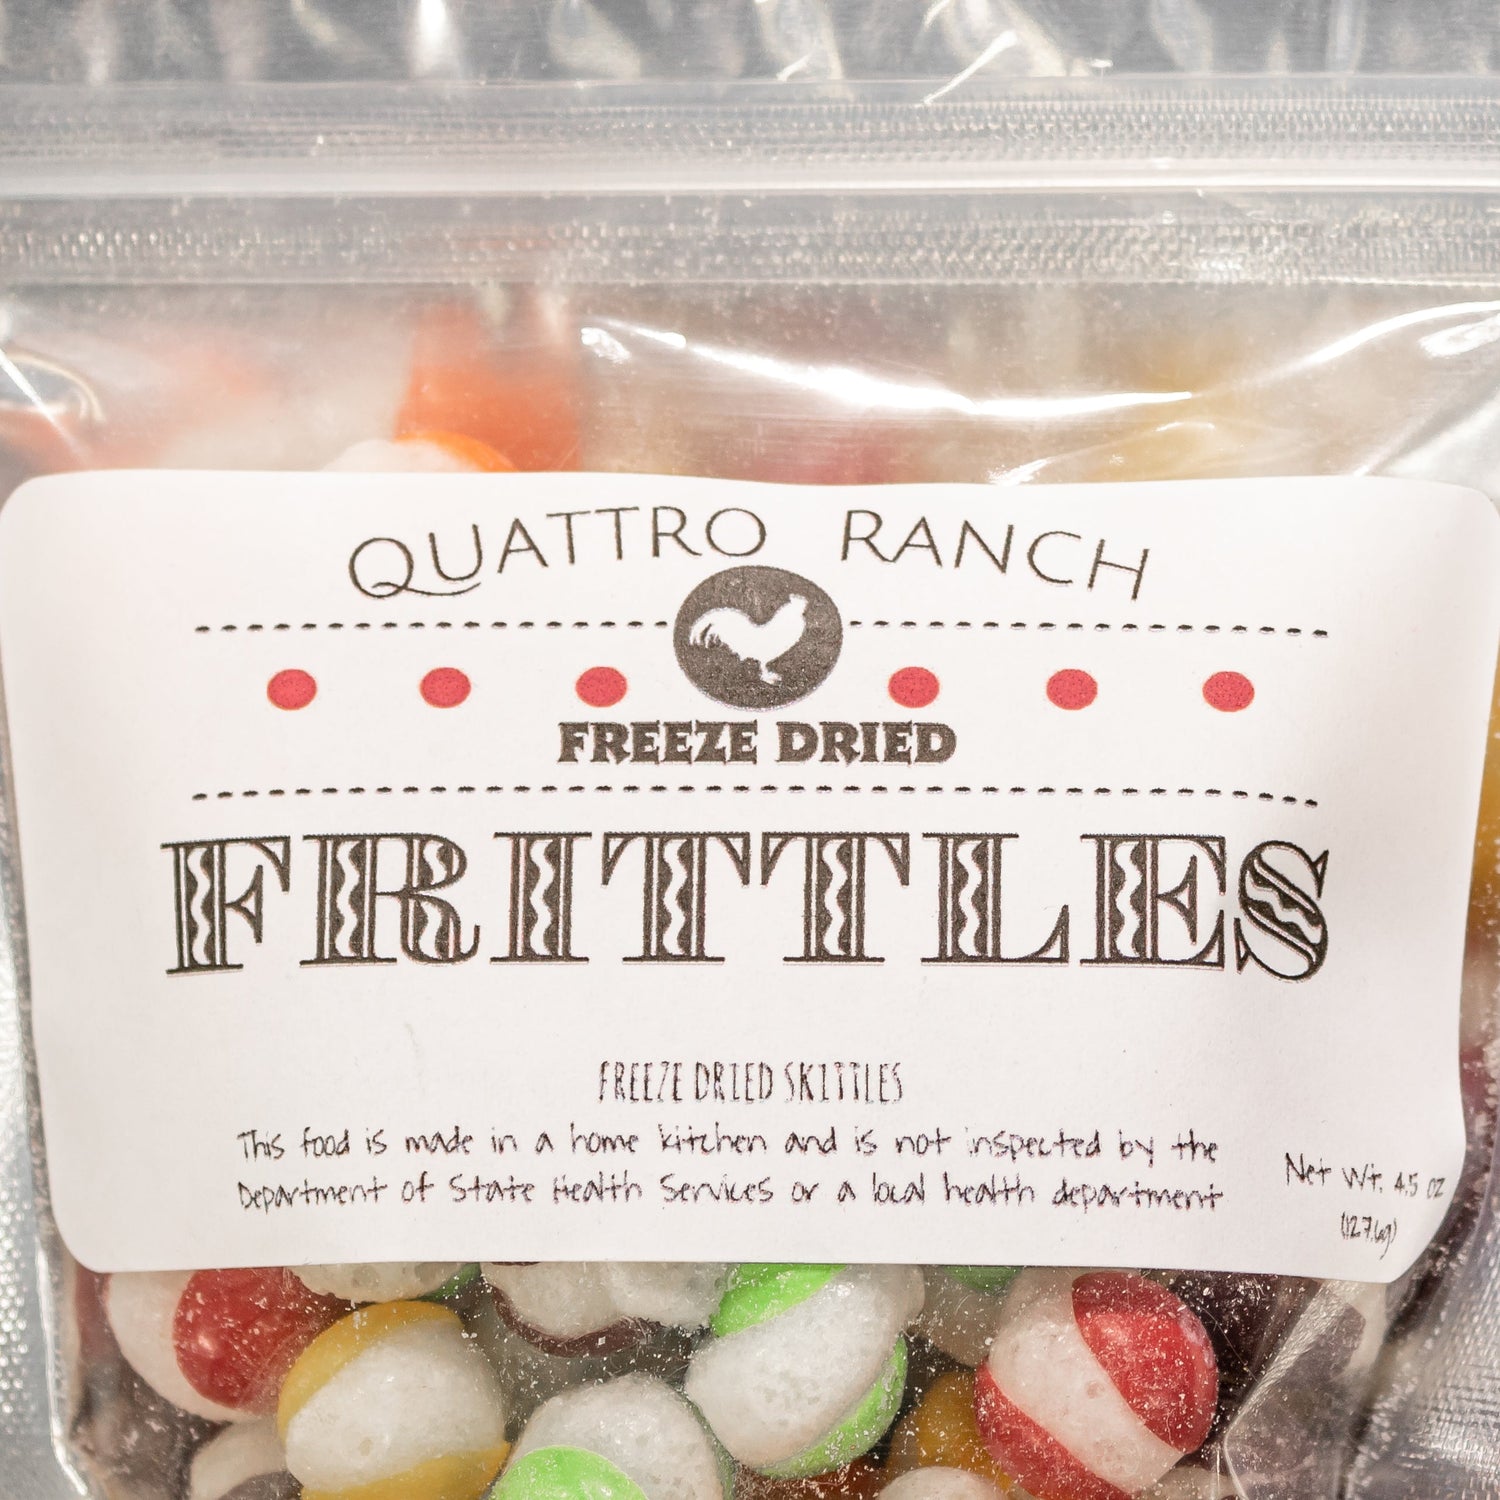 Quattro Ranch Freeze Dried Frittles